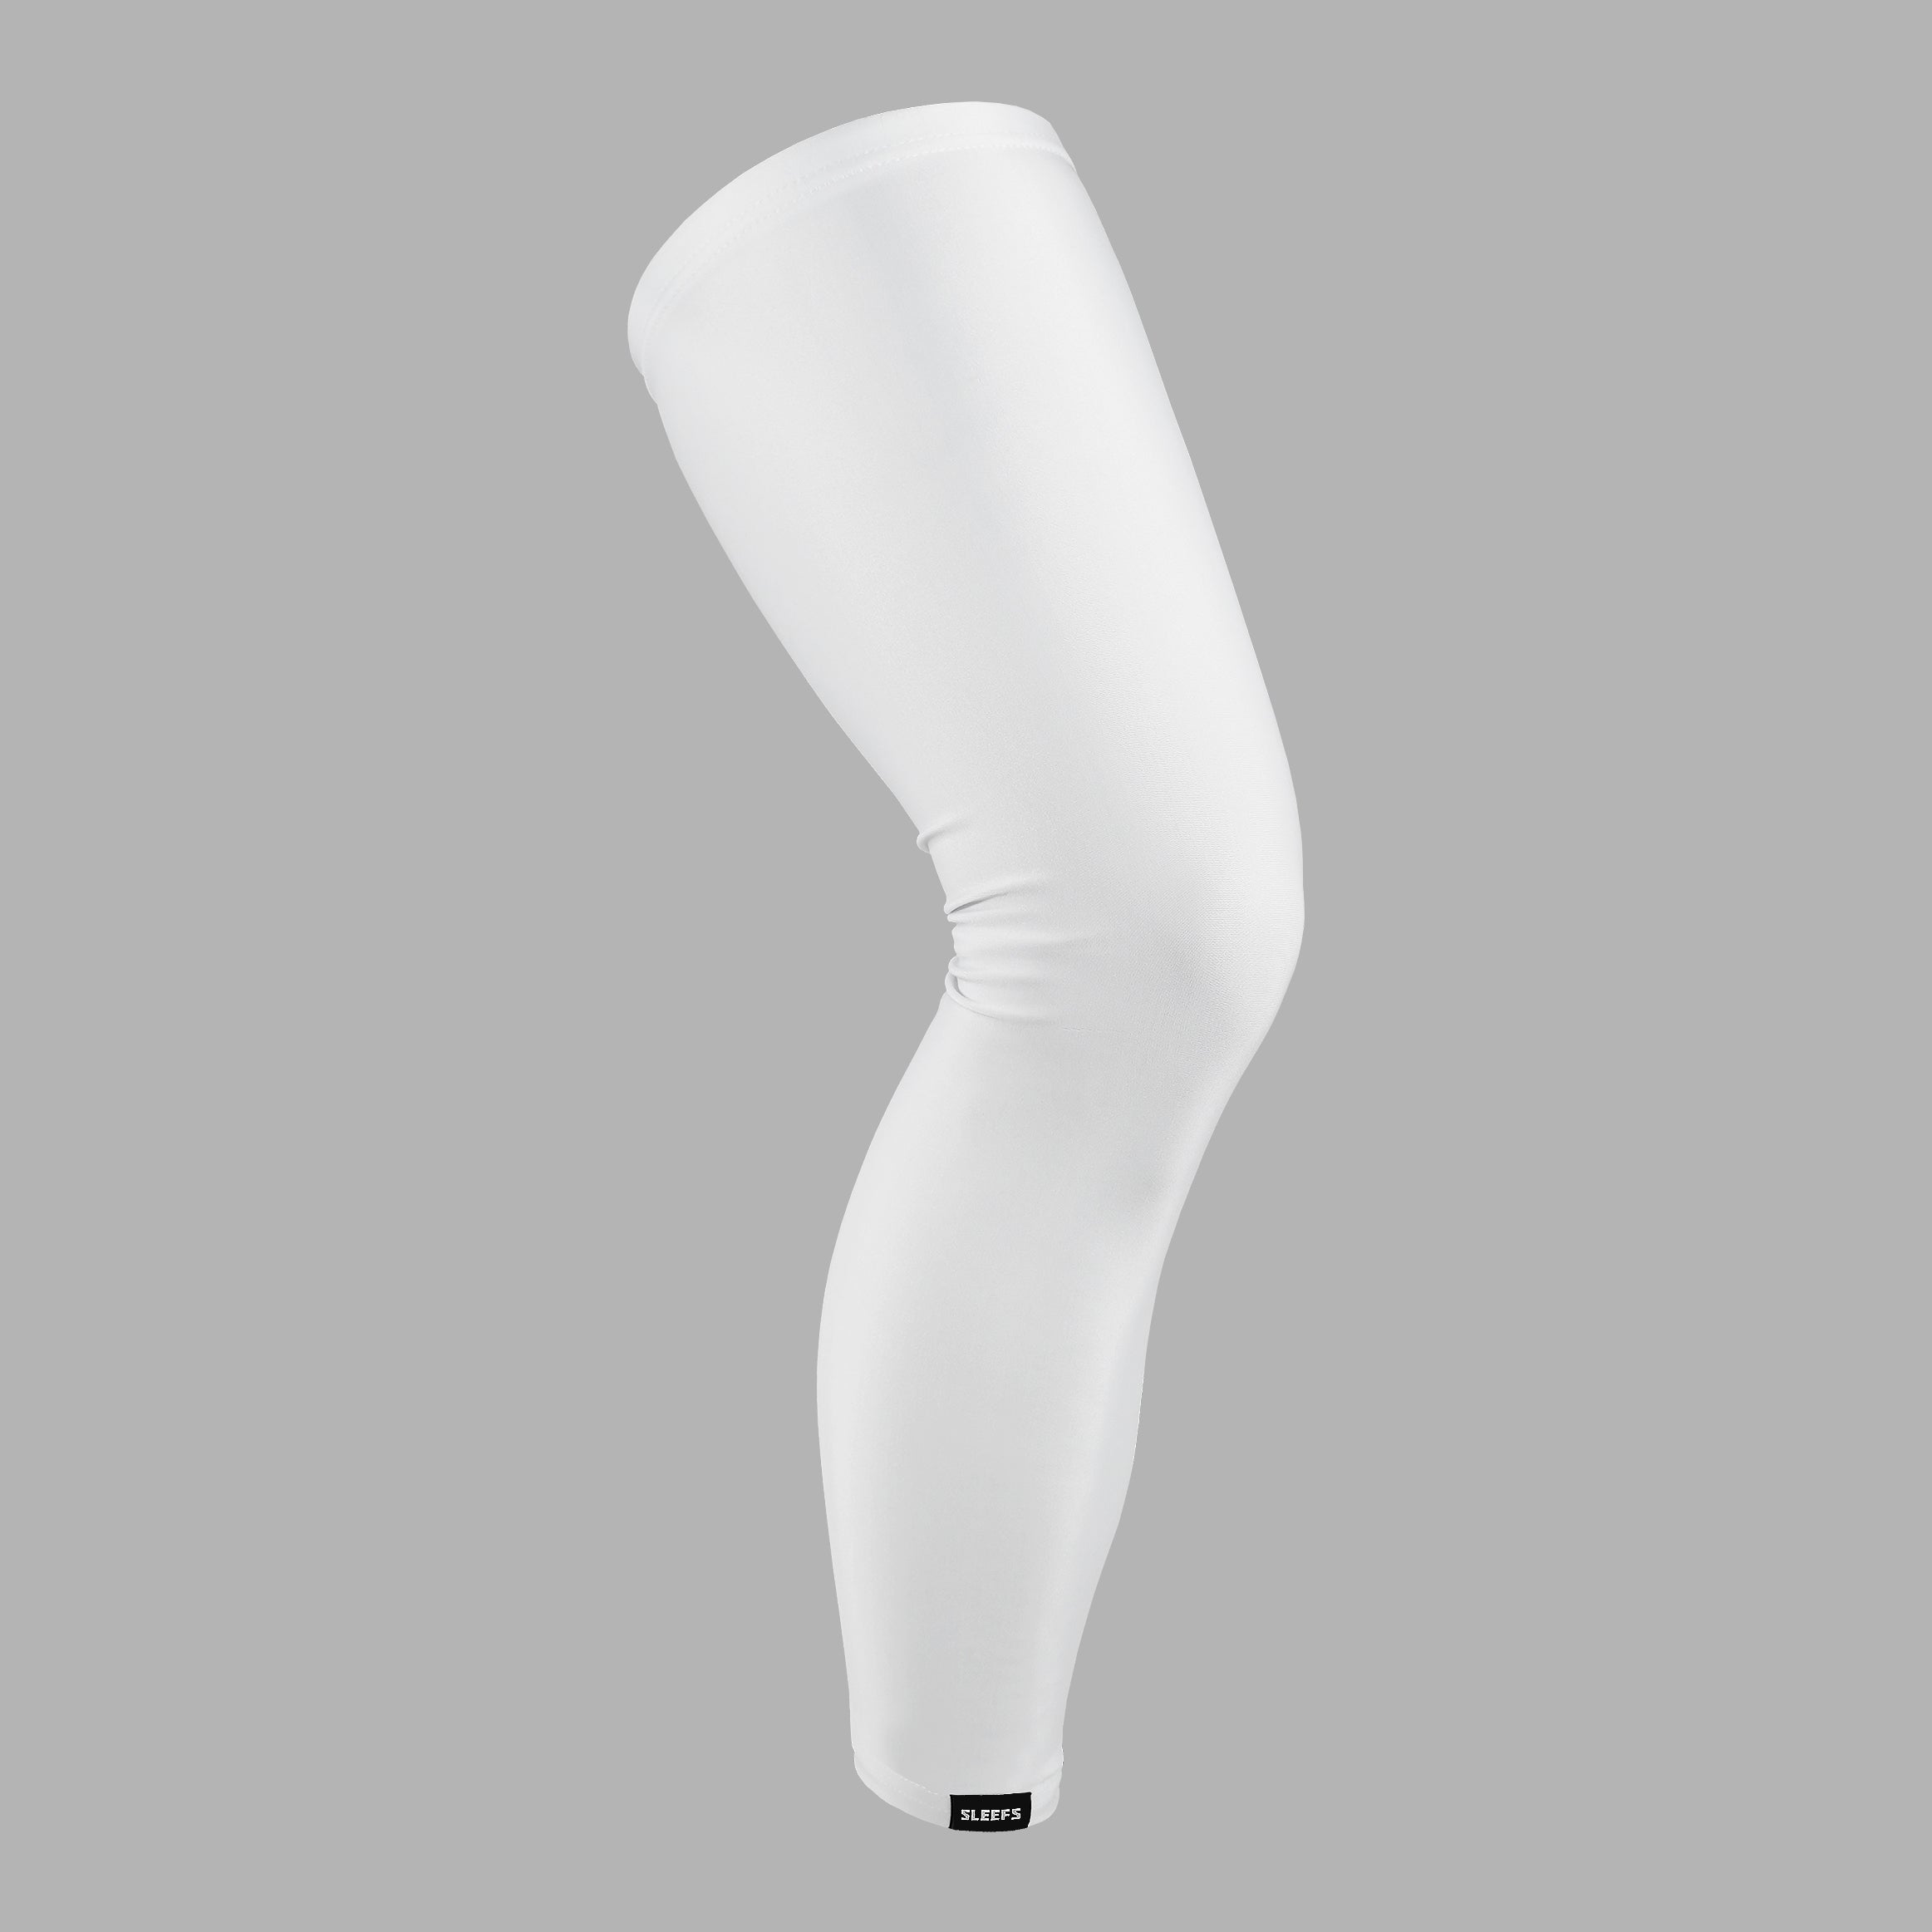 ESS Calf Compression Sleeve - White - Just Volleyball Ltd